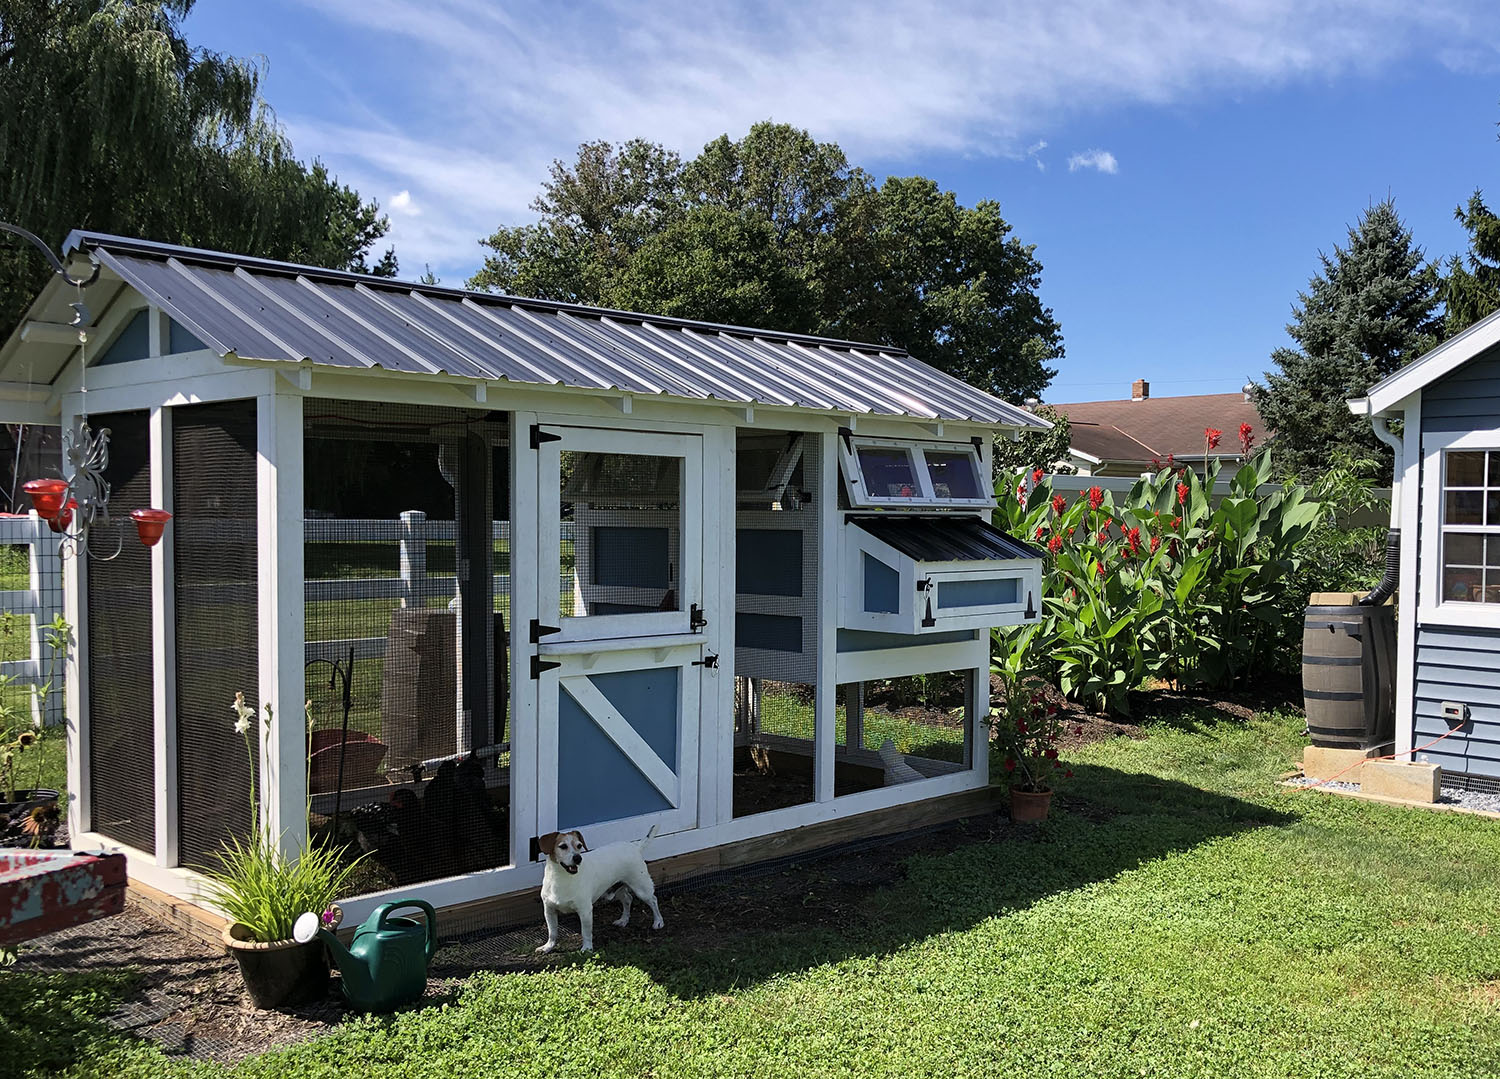 6’x12′ American Coop in PA with Dutch door and two tone paint job